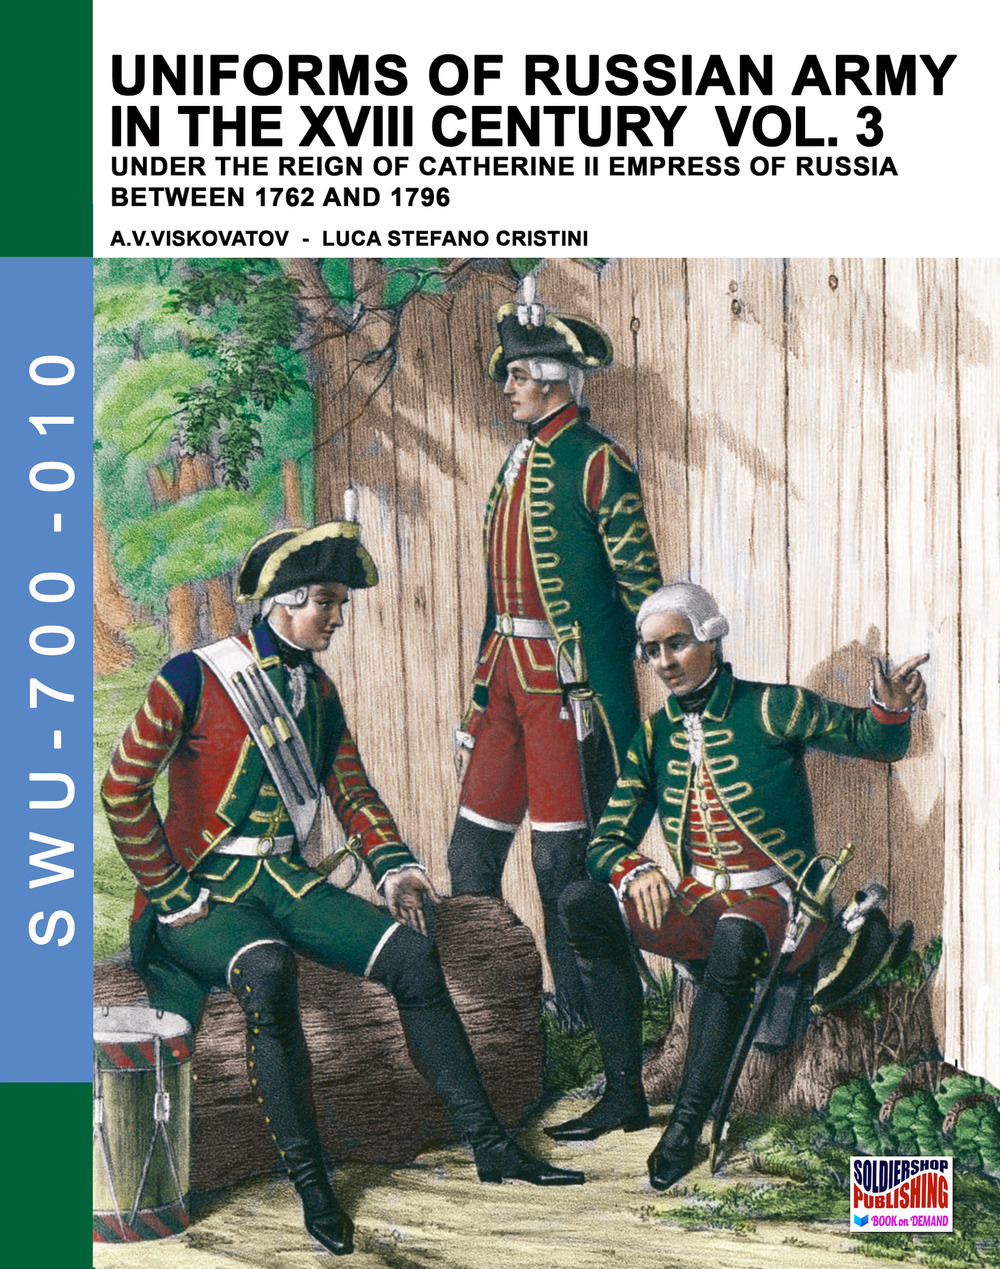 Uniforms of russian army in the XVIII century. Under the reign of Catherine II Empress of Russia between 1762 and 1796. Vol. 3